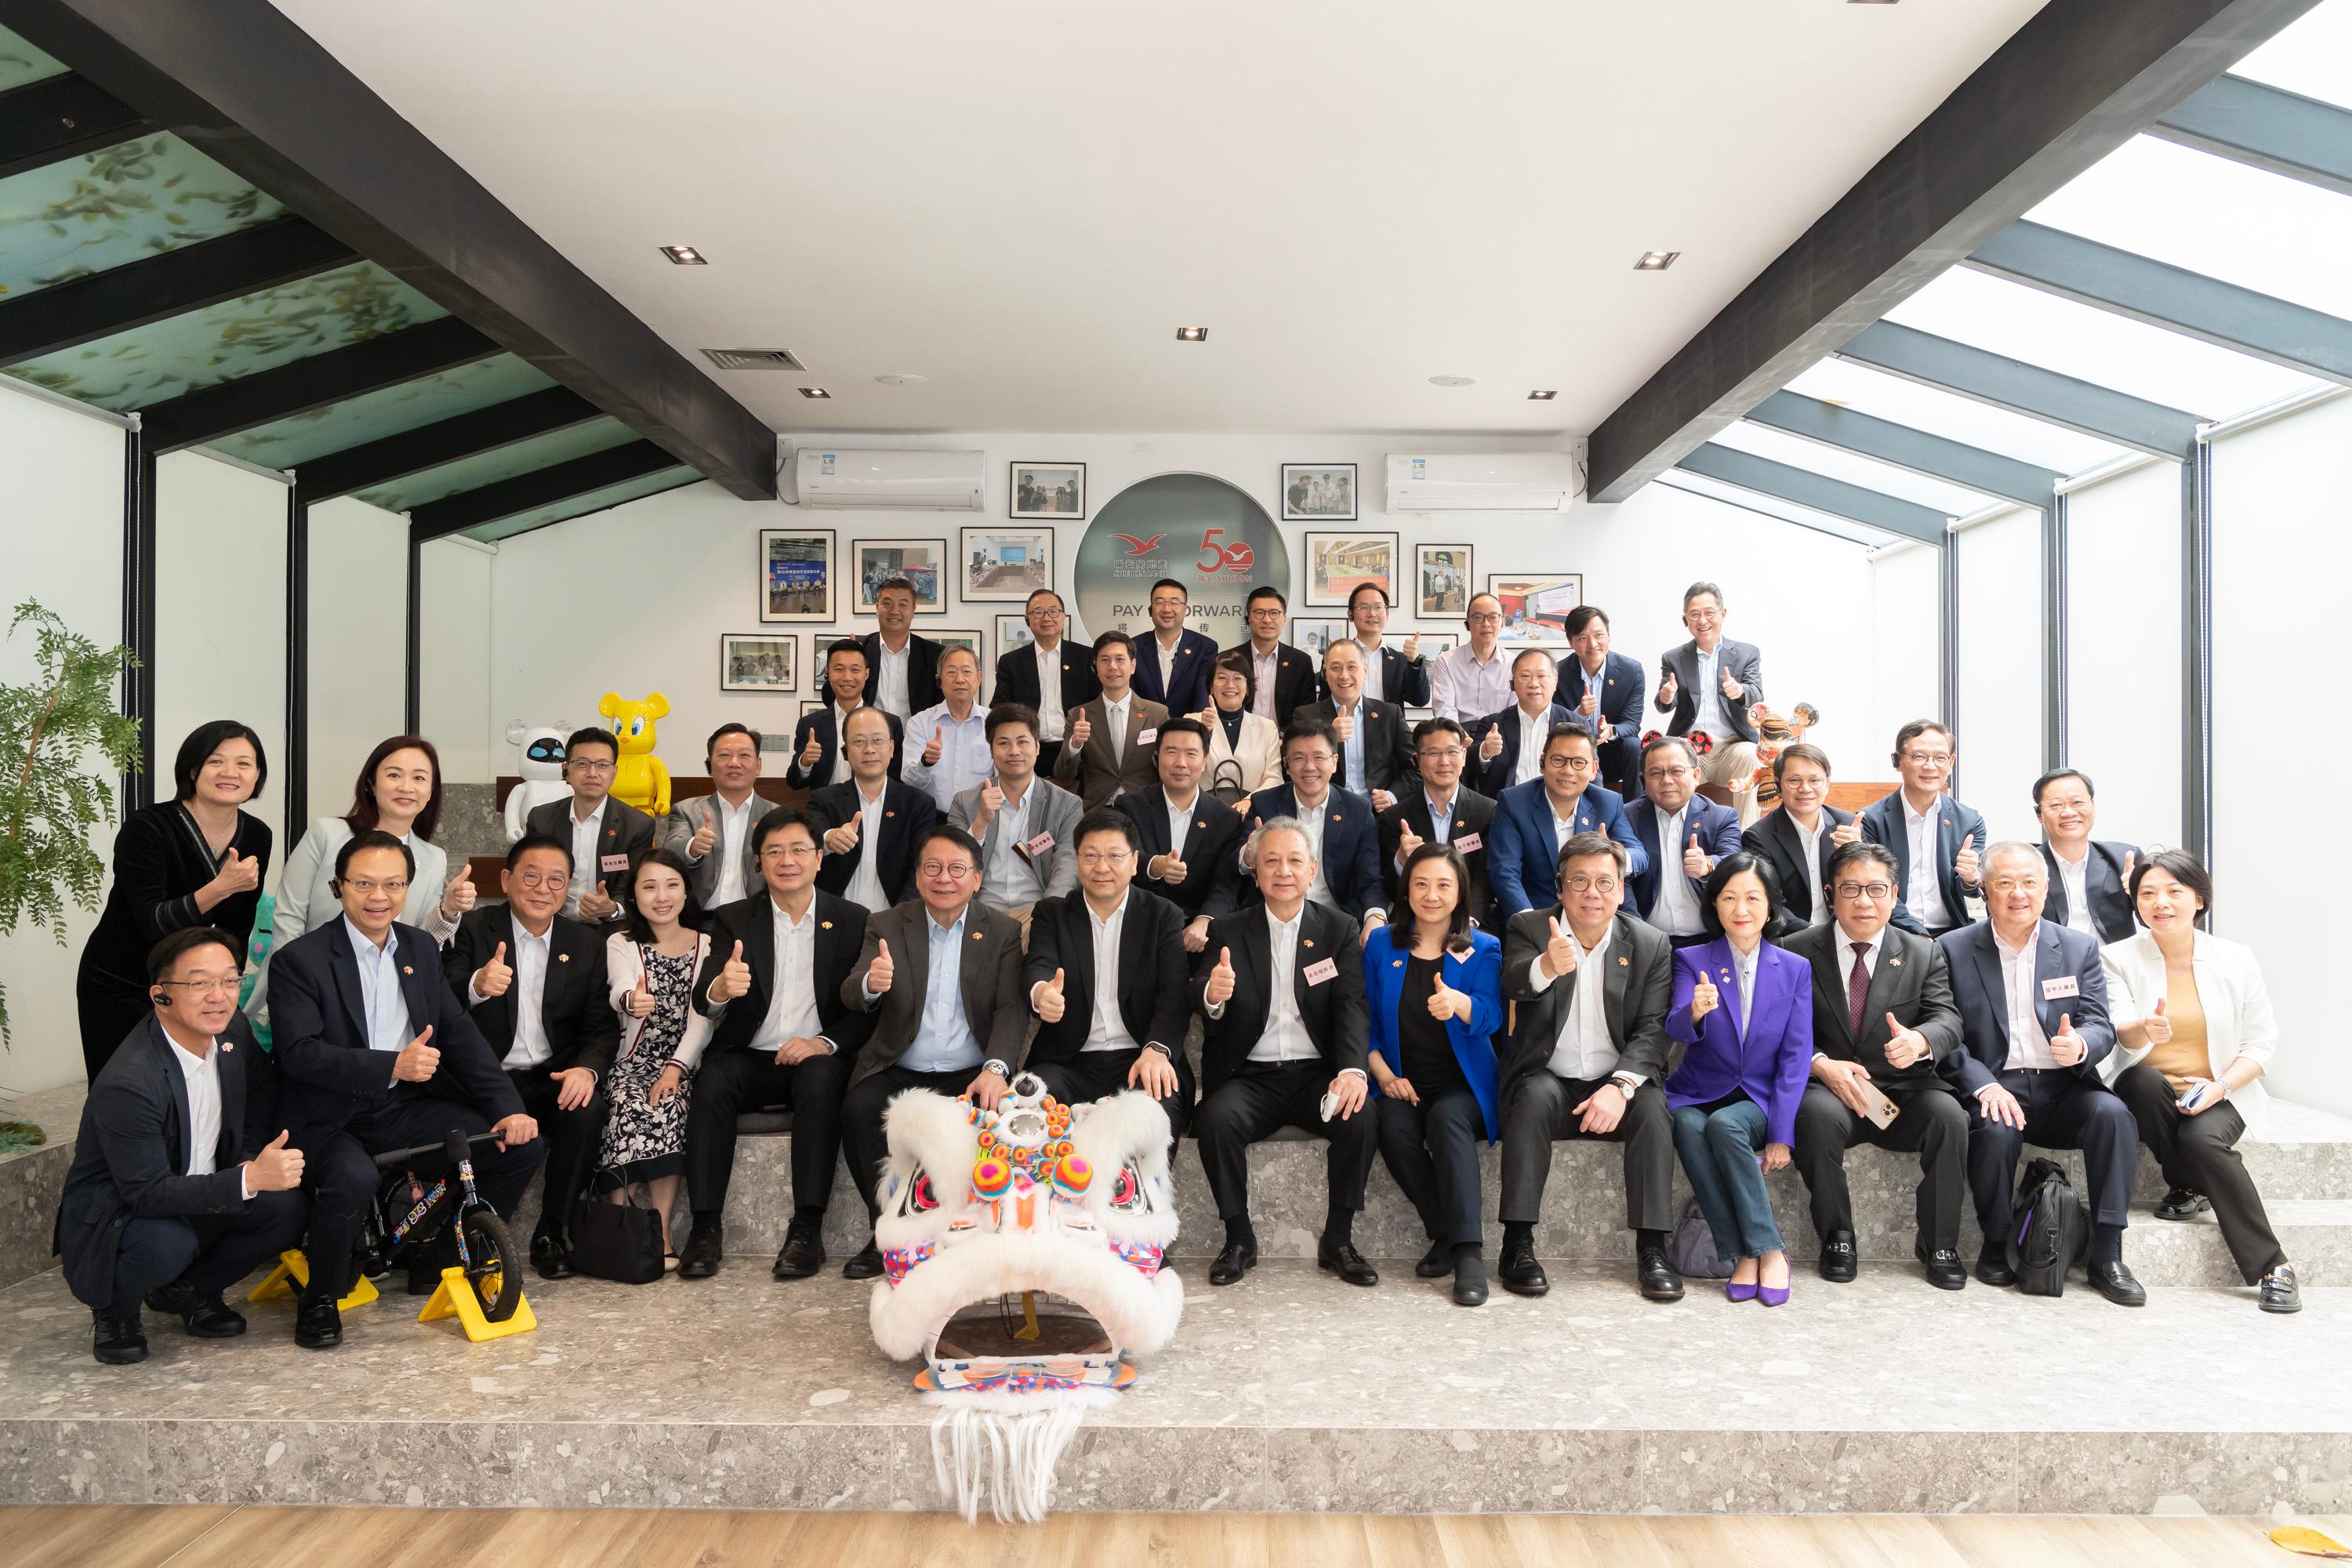 The delegation of the Hong Kong Special Administrative Region Government and the Legislative Council led by the Chief Executive, Mr John Lee, continues its duty visit in the Guangdong-Hong Kong-Macao Greater Bay Area today (April 23). The Chief Secretary for Administration, Mr Chan Kwok-ki (front row, sixth left); Deputy Secretary of the Communist Party of China Foshan Municipal Party Committee and Mayor of the Foshan Municipal Government, Mr Bai Tao (front row, seventh left); and other delegation members visited the Jian's Villa at Lingnan Tiandi to learn more about the policy of heritage conservation in Foshan.